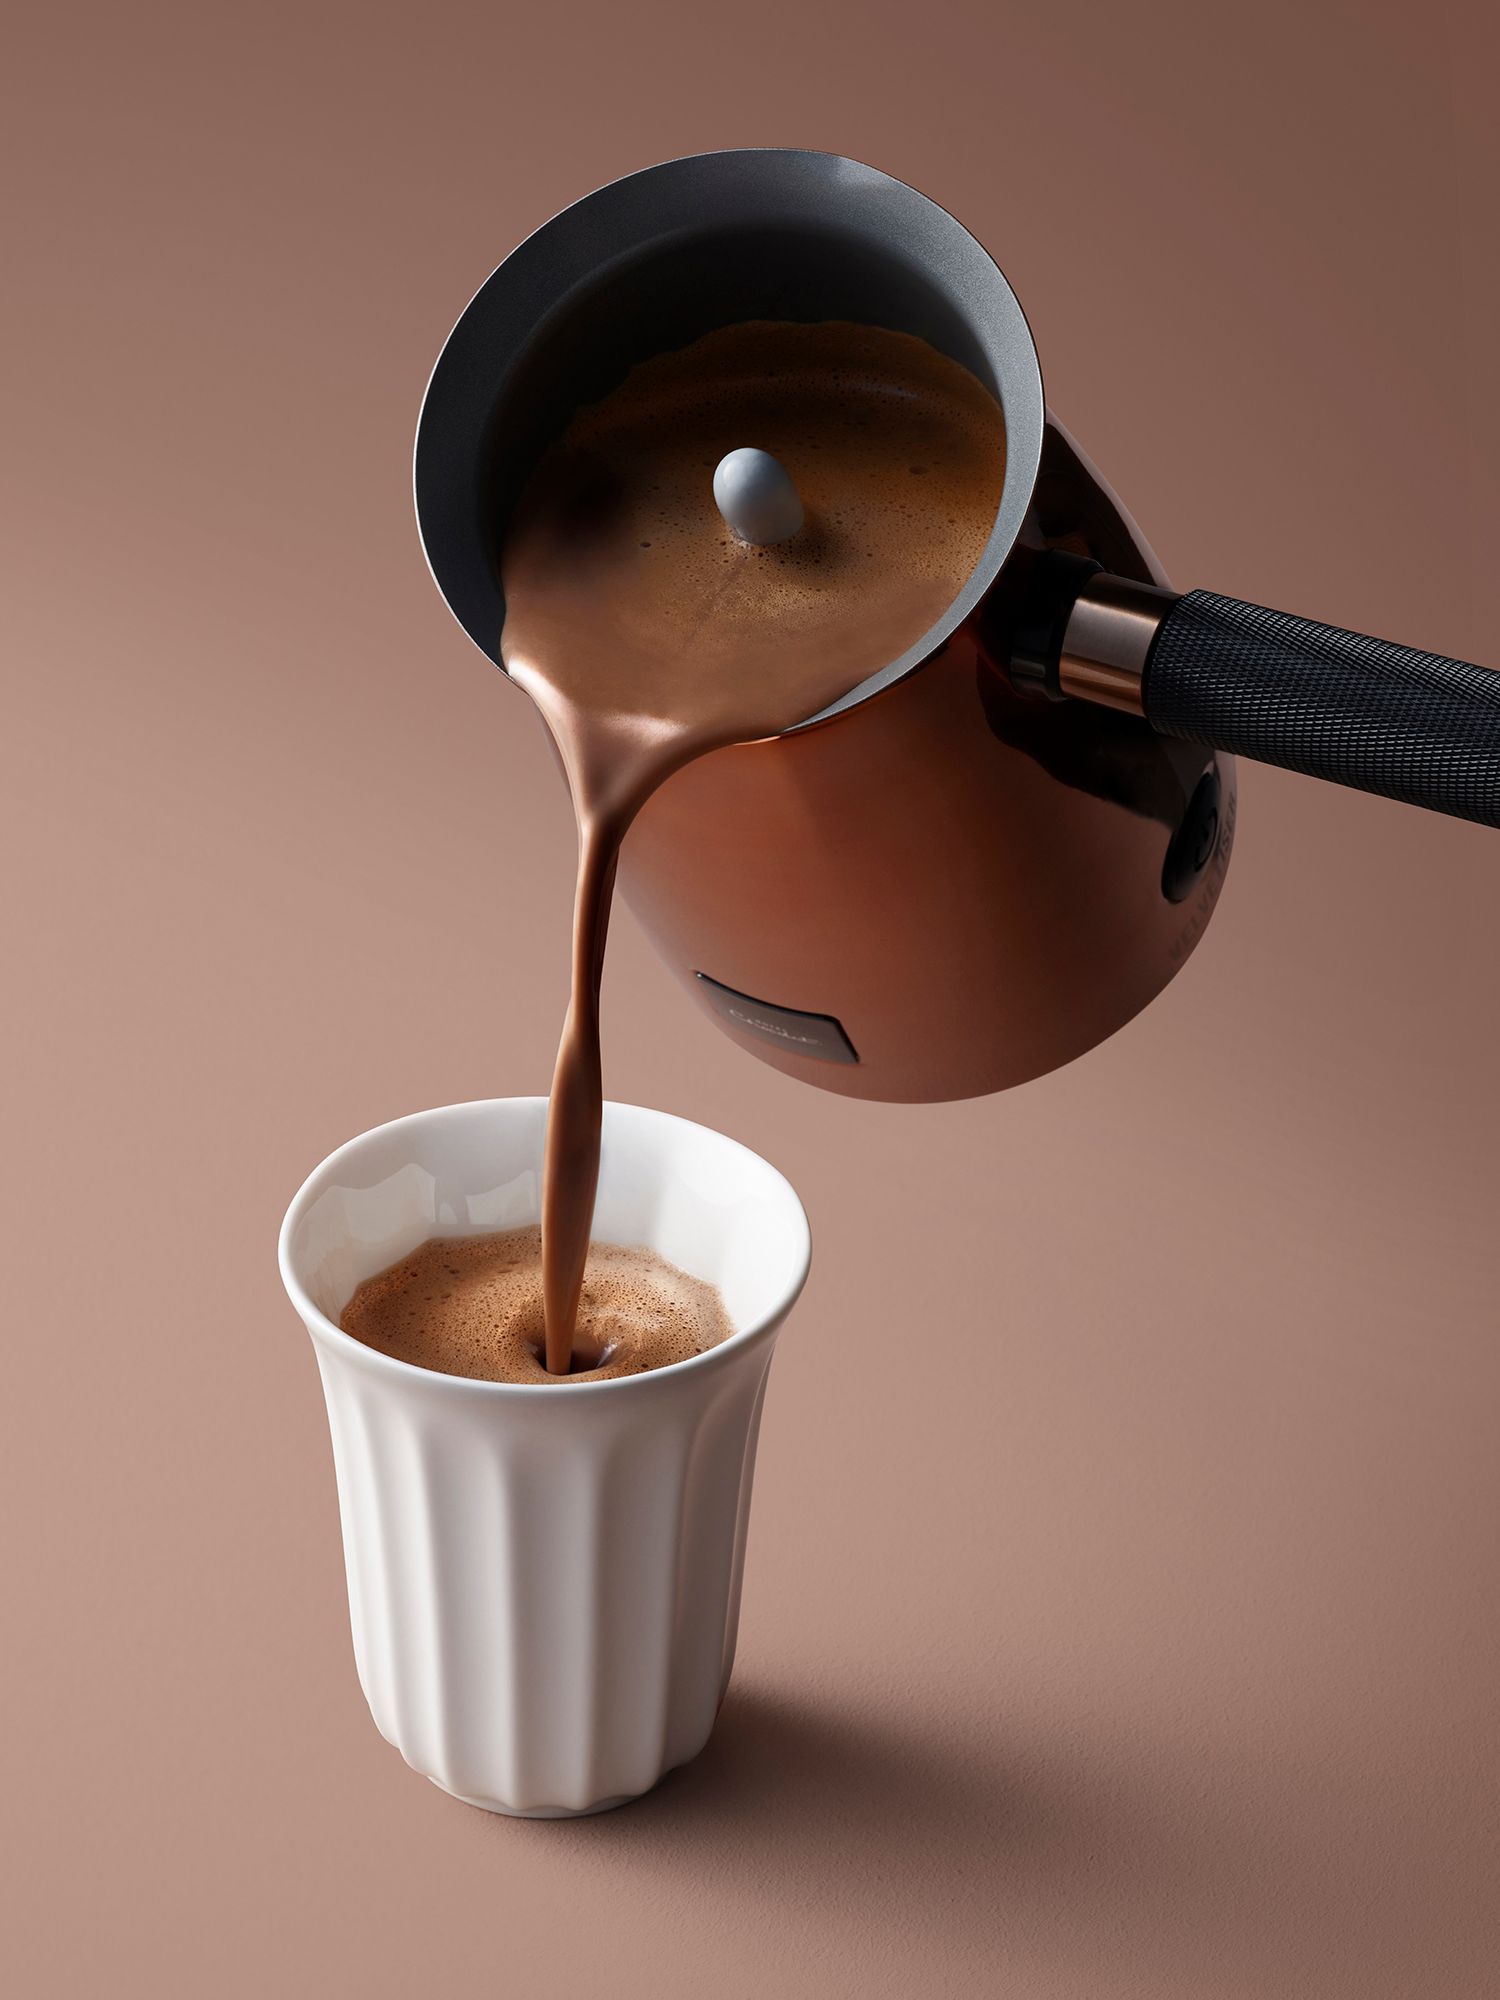 Hotel Chocolat's Velvetiser hot chocolate has got everyone on the internet  all in a froth